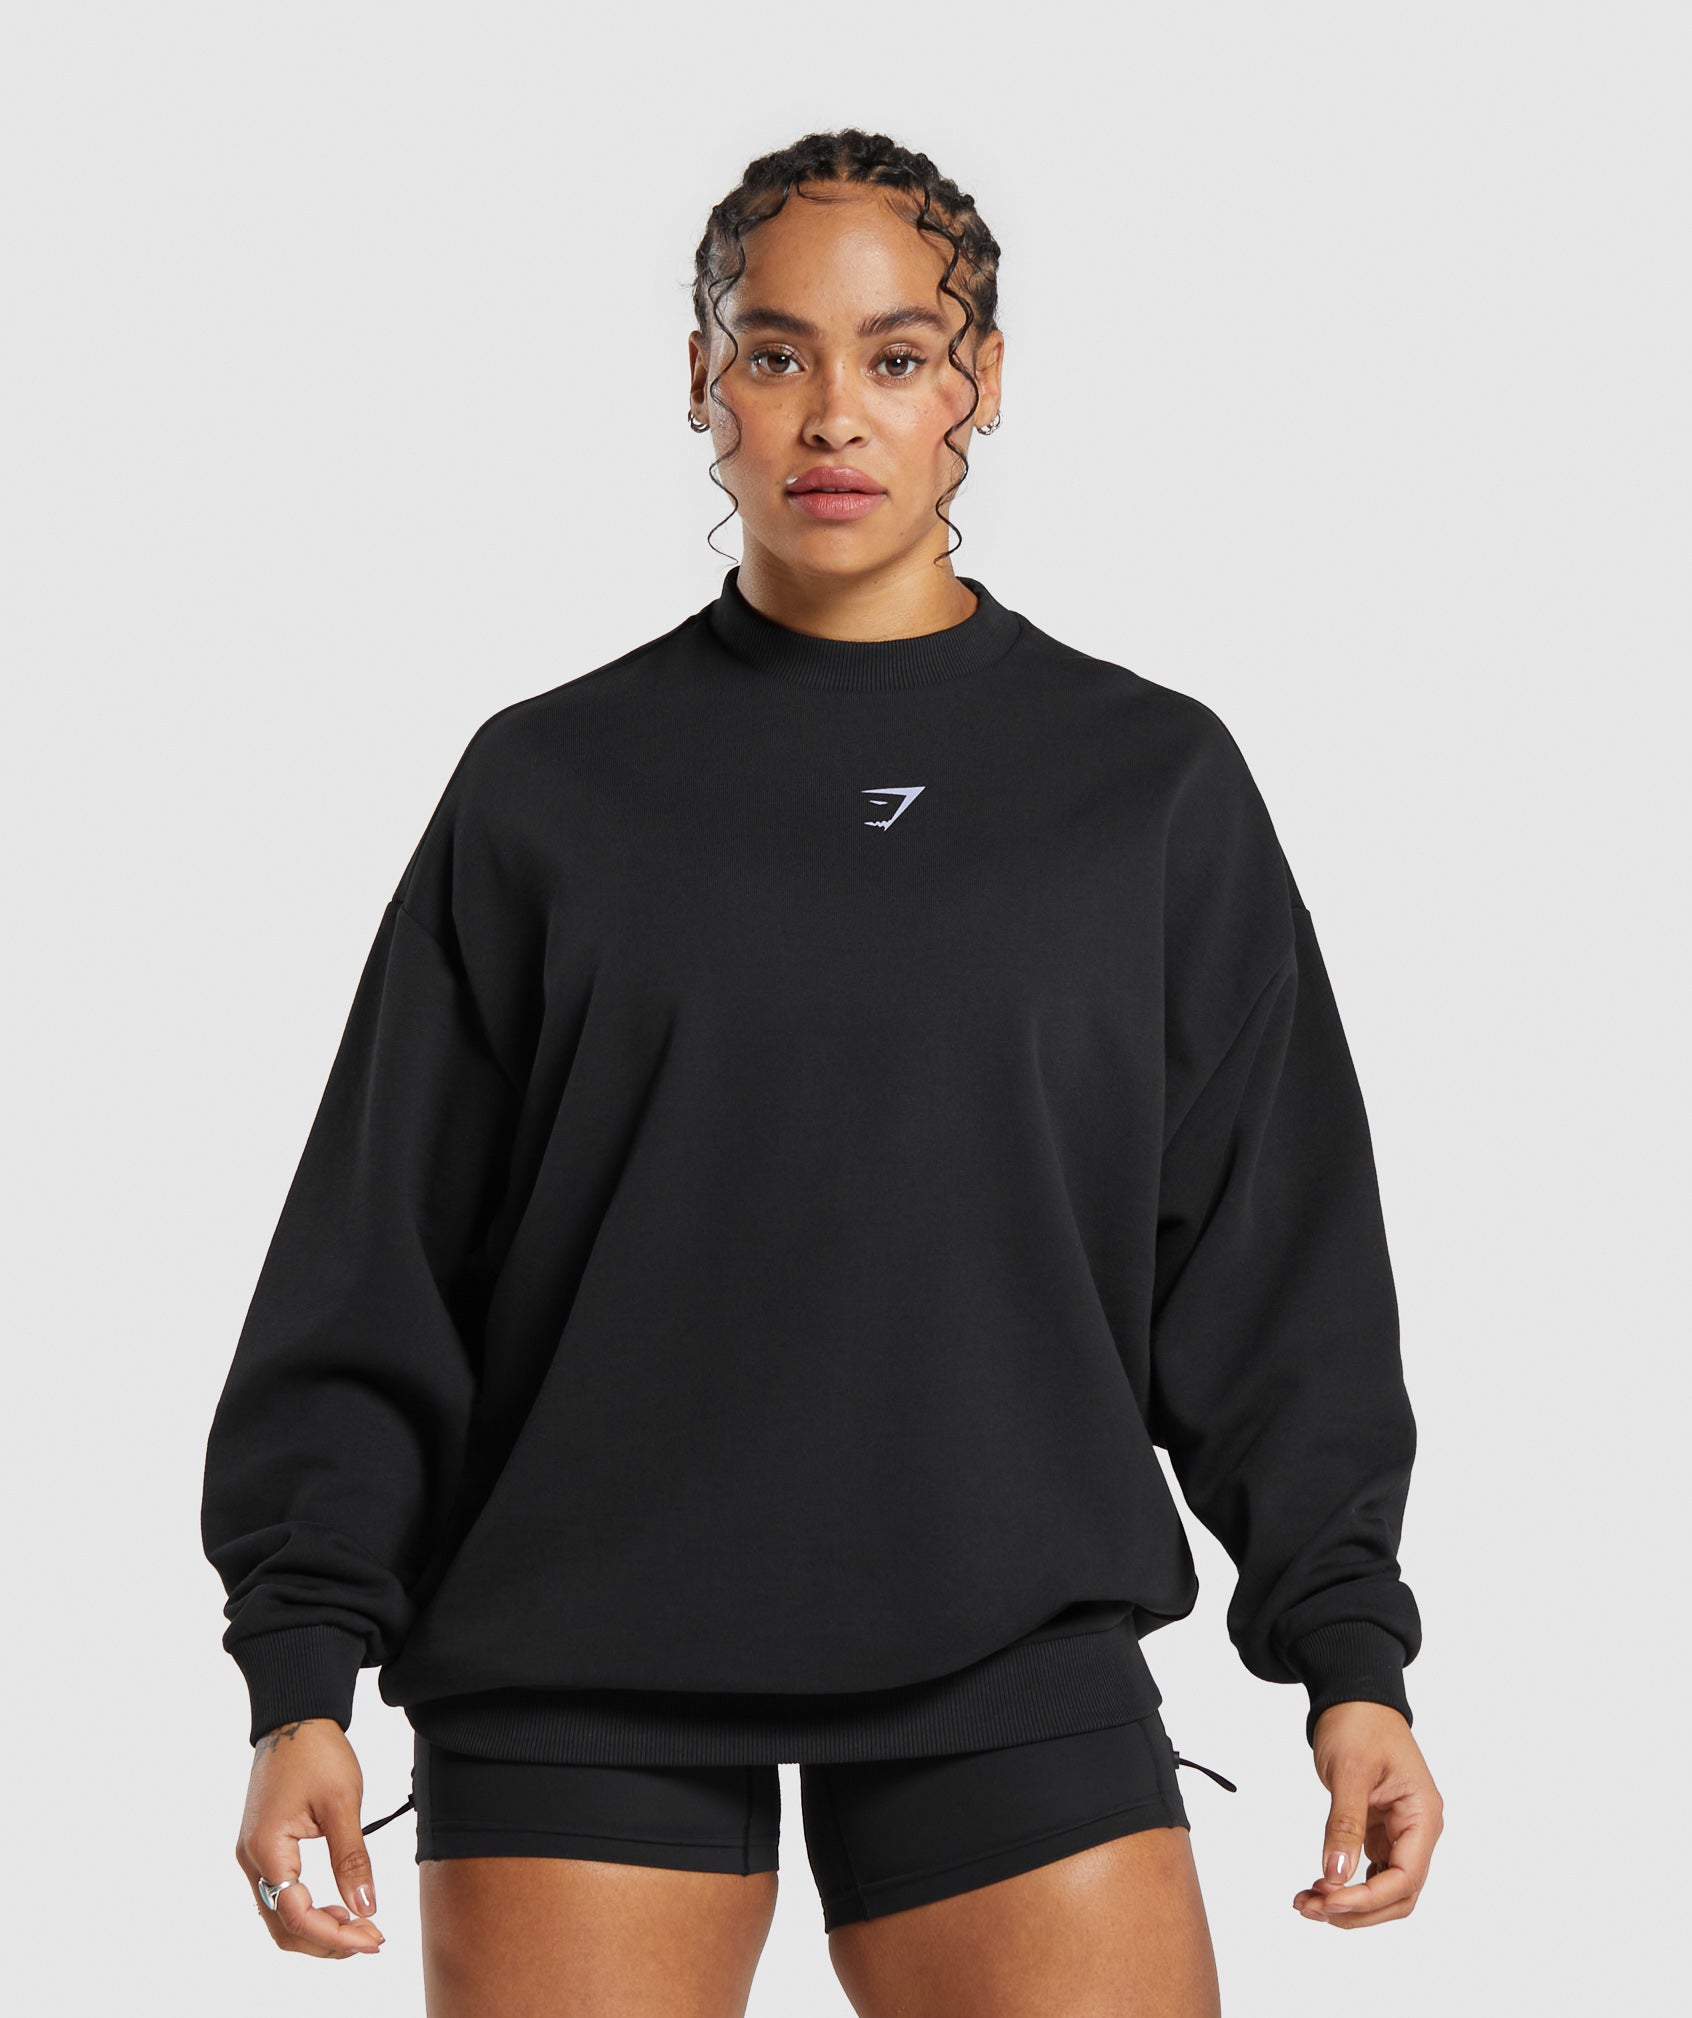 Lifting Essential Sweater in Black - view 2